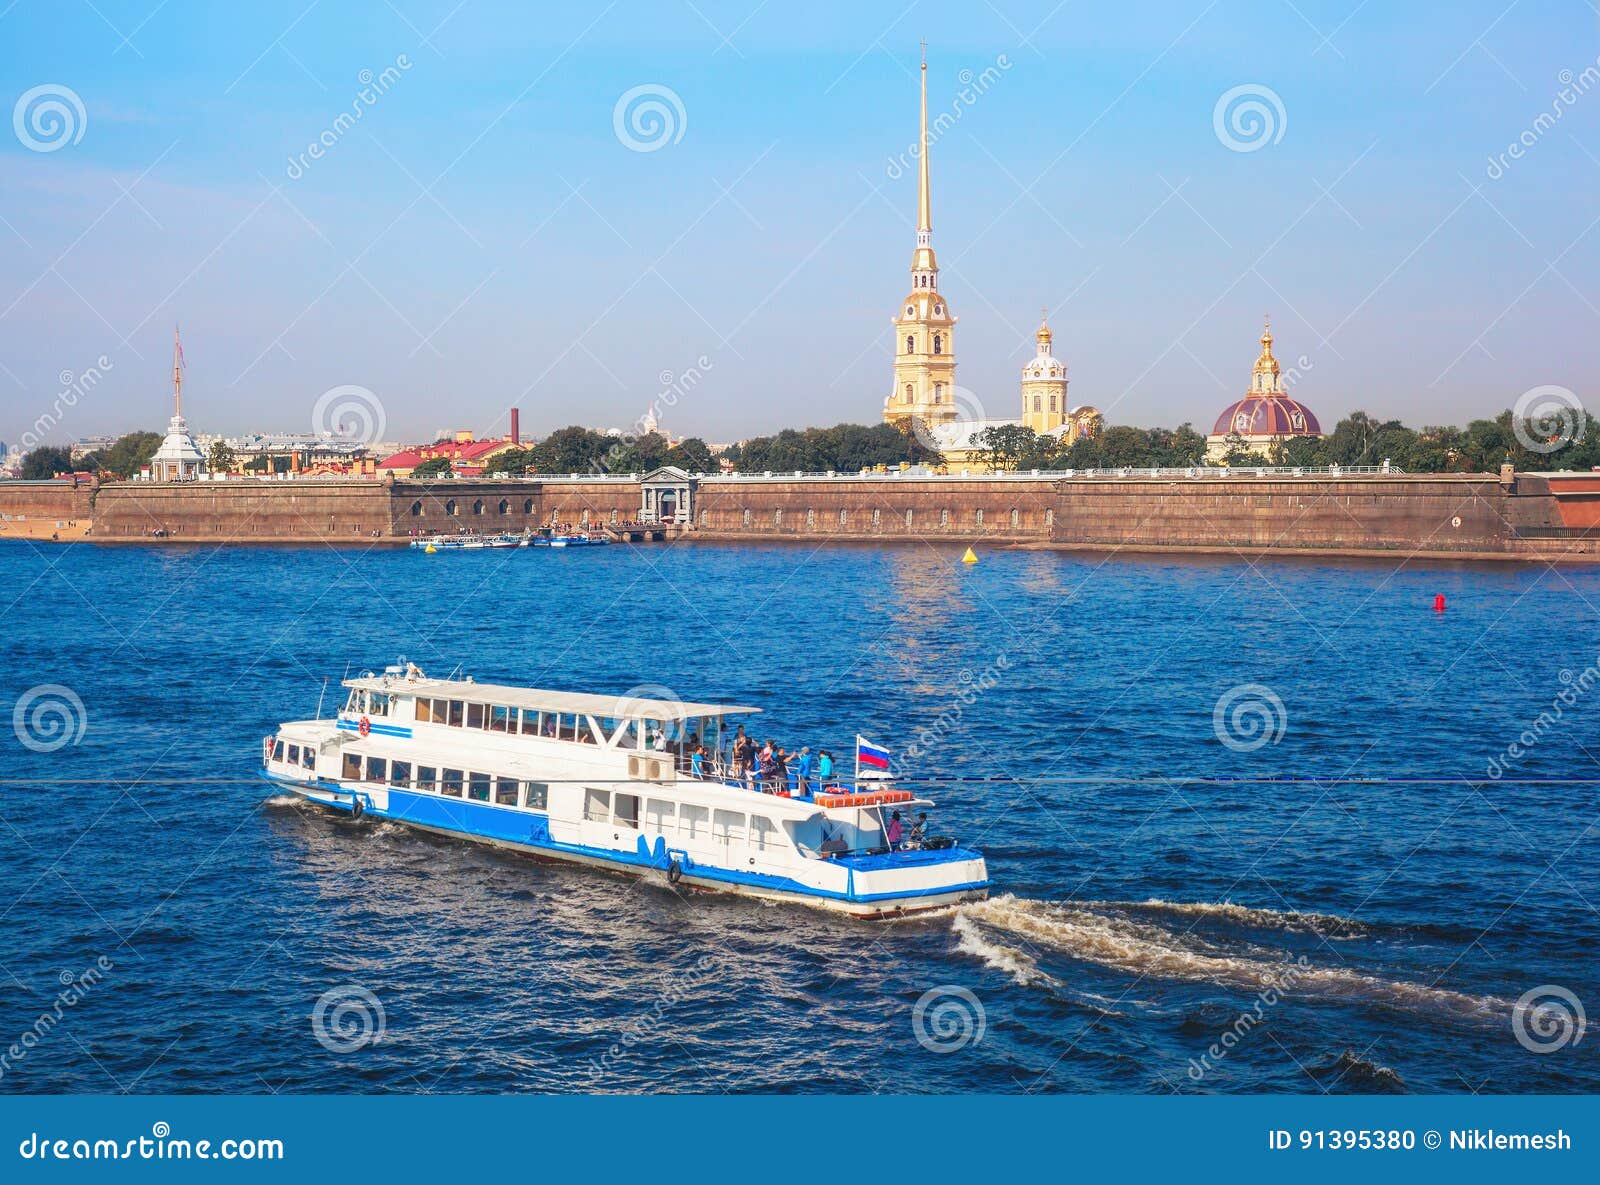 the ship sails along the neva river near the peter and paul fortress